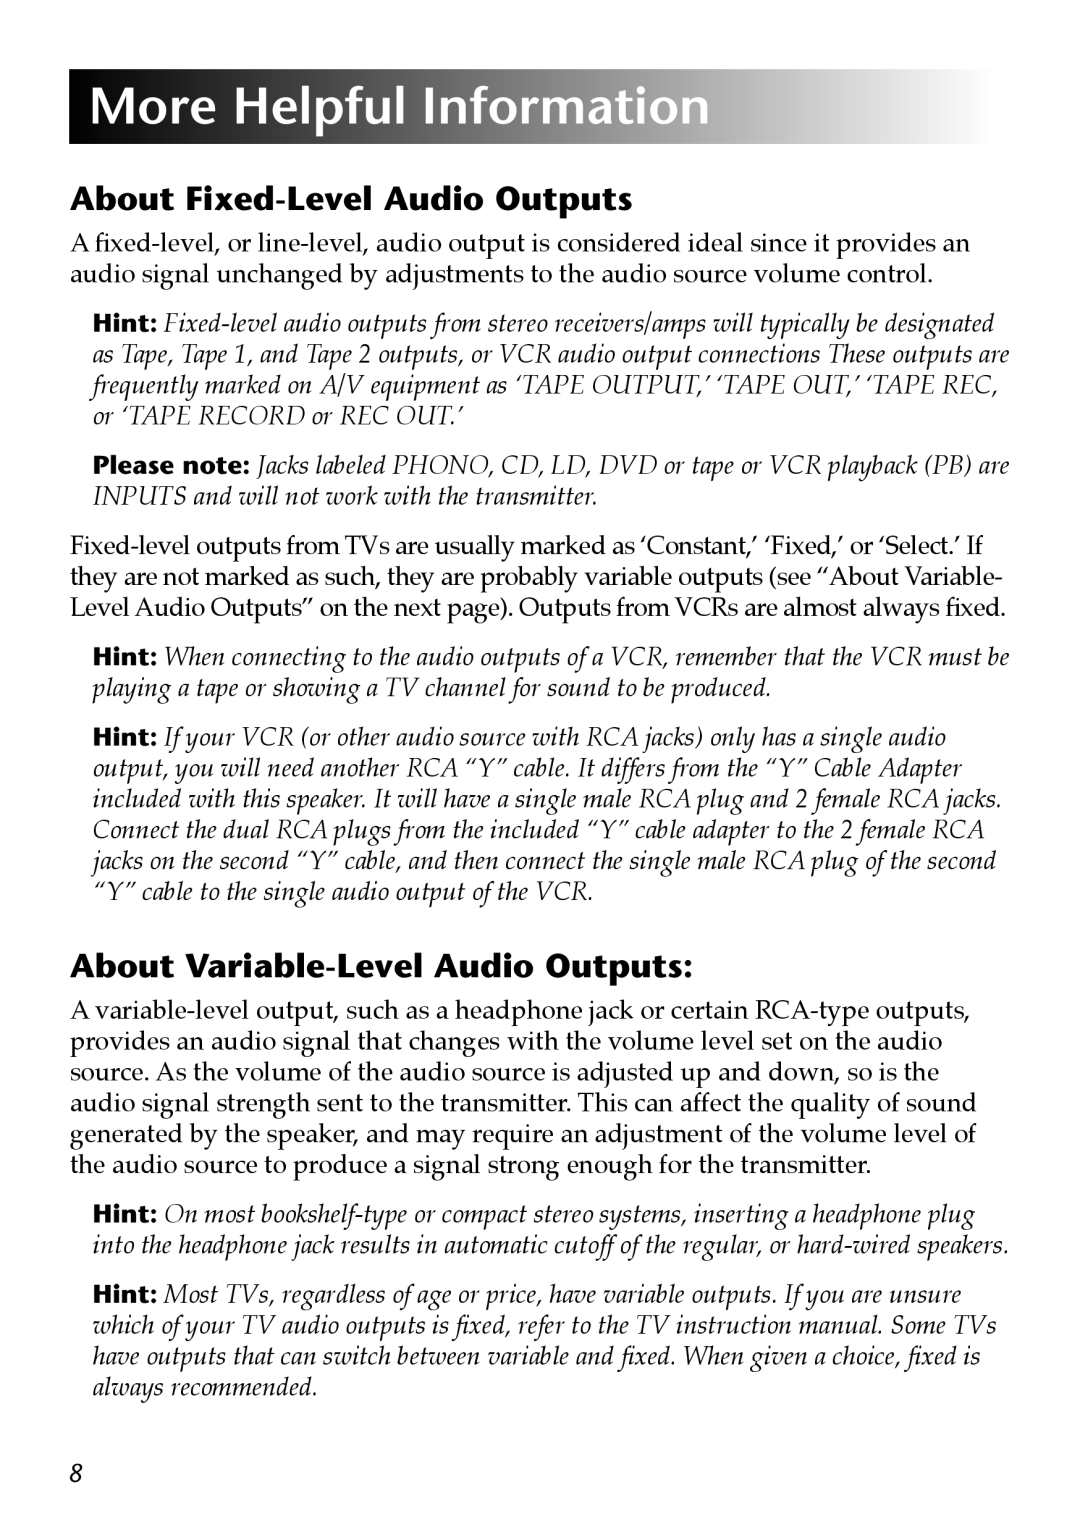 Acoustic Research AW822 More Helpful Information, About Fixed-LevelAudio Outputs, About Variable-LevelAudio Outputs 